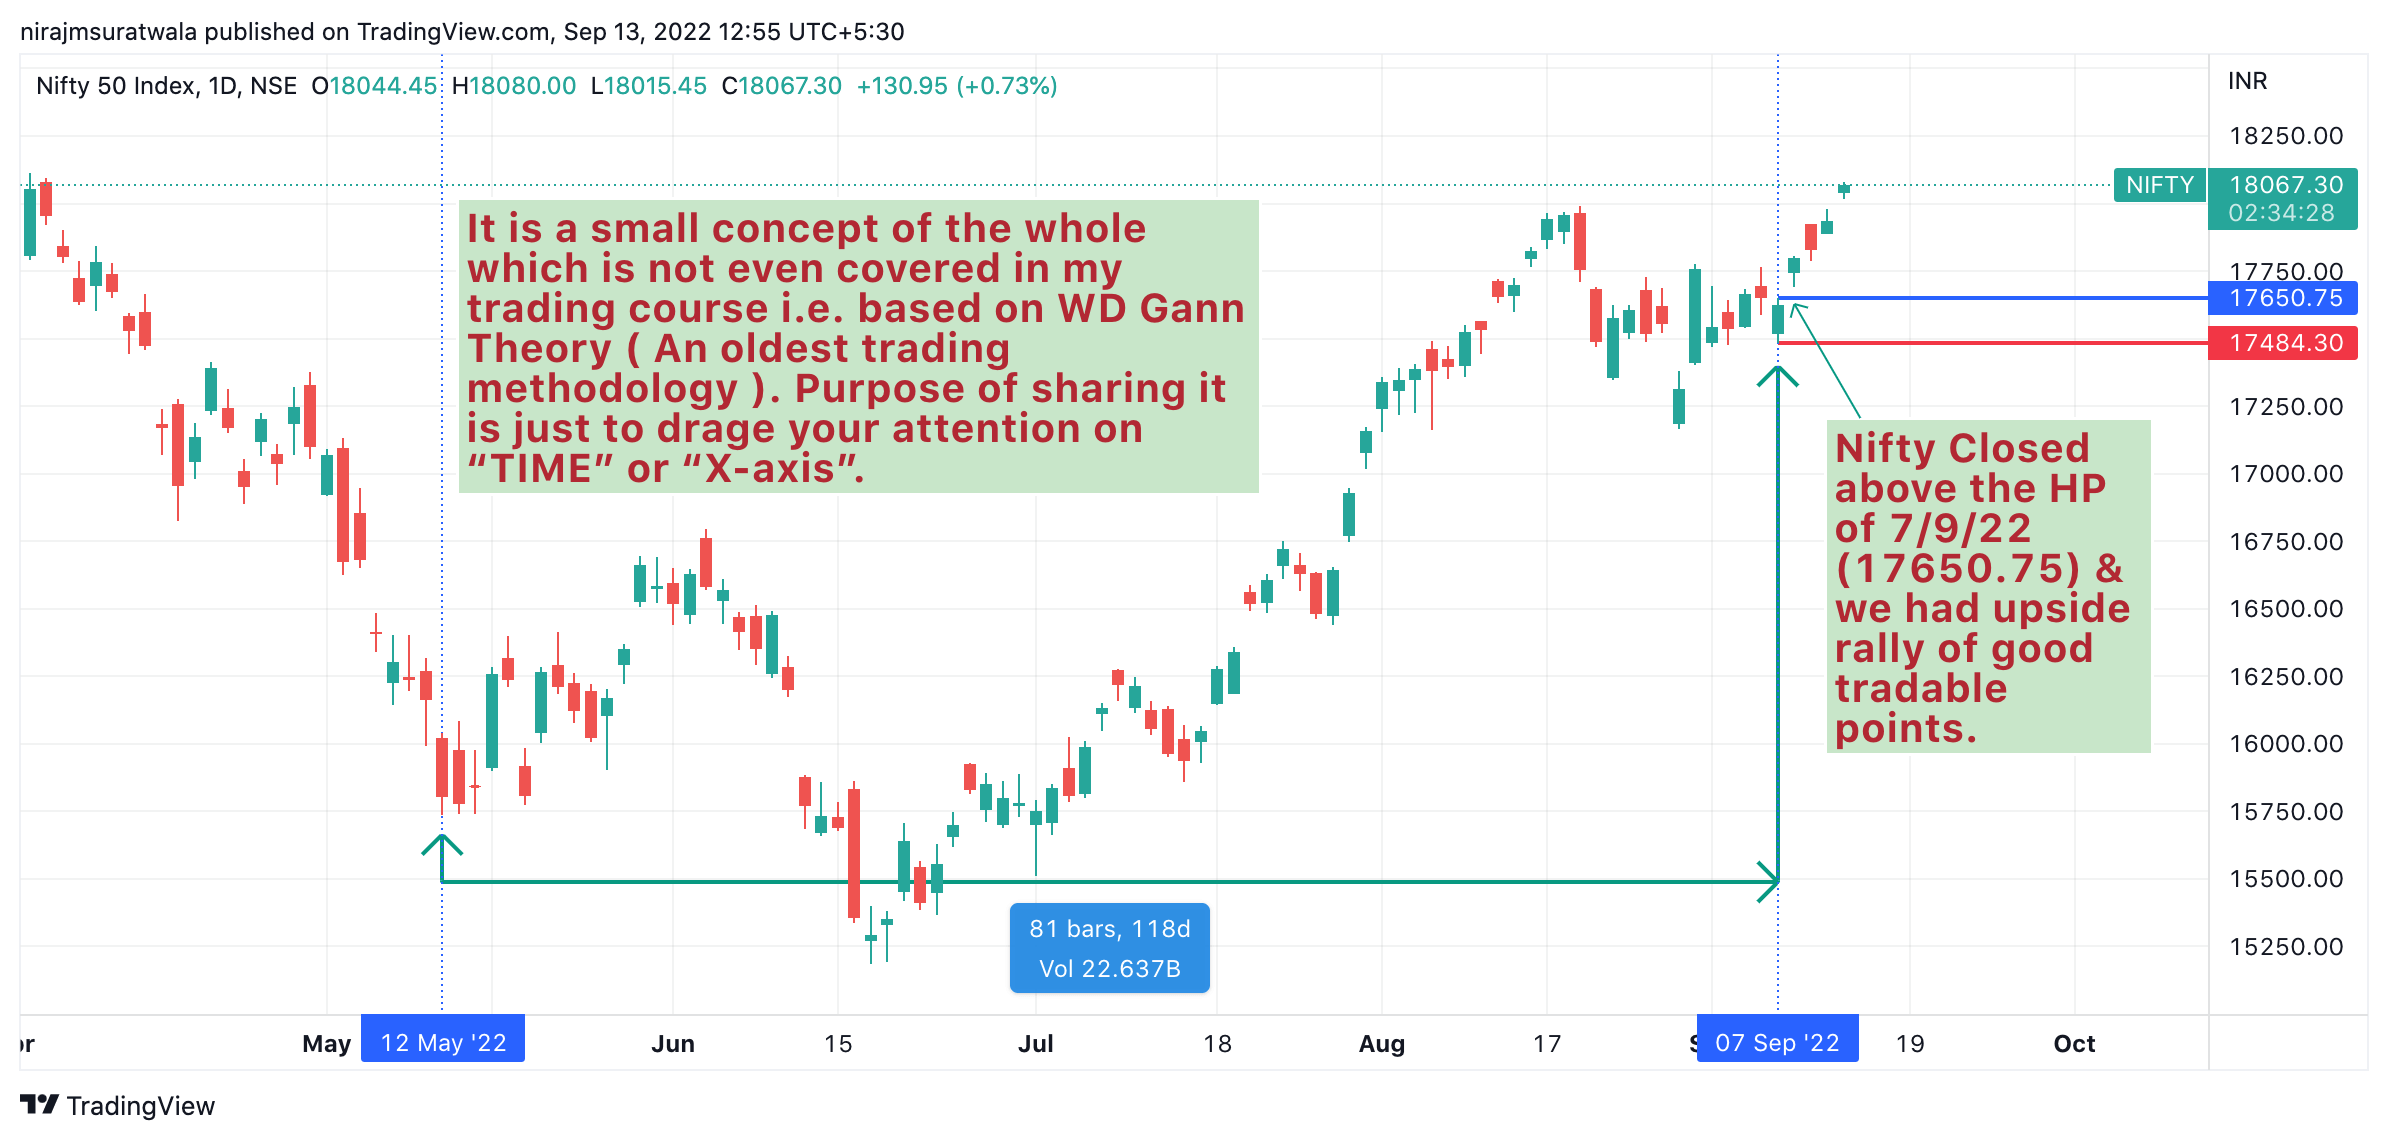 How to trade in nifty 50 is Explained & nifty outlook 07/9/22 Onwards.